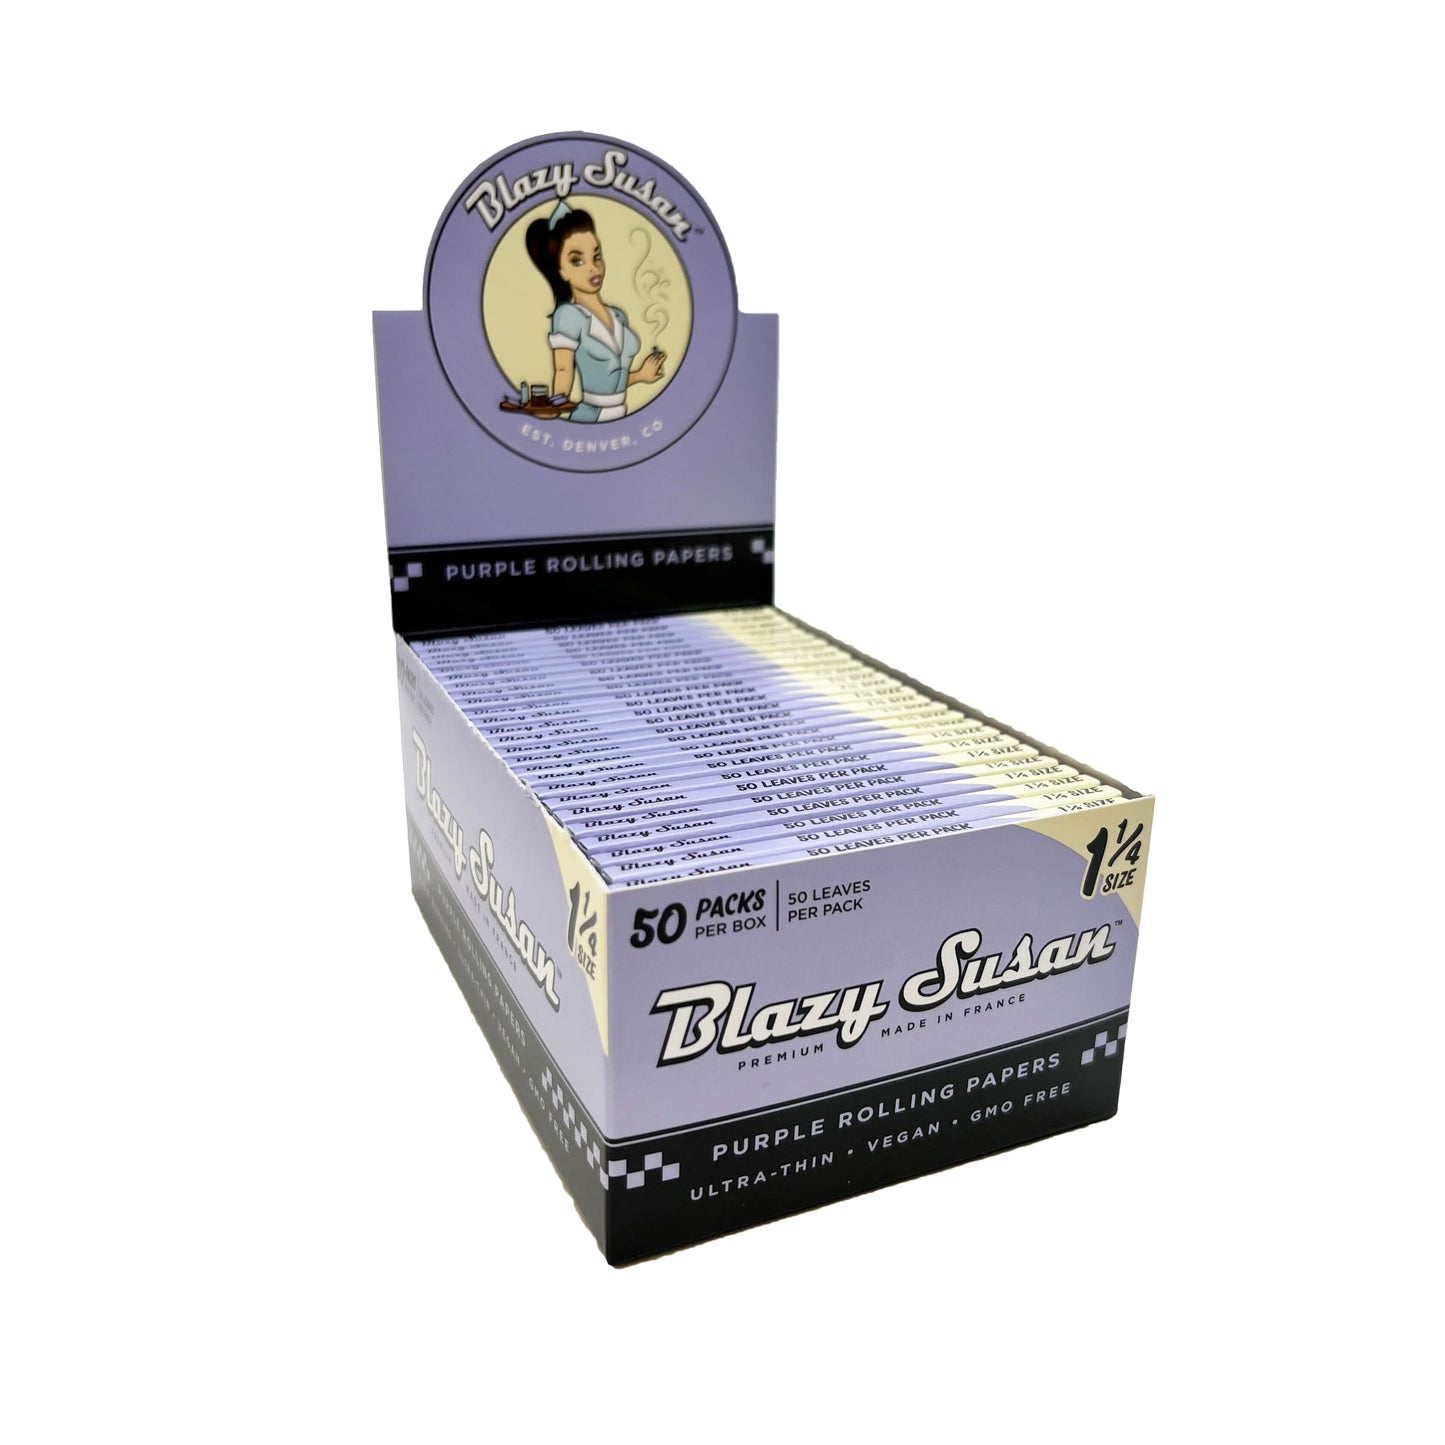 Blazy Susan® Purple Rolling Papers